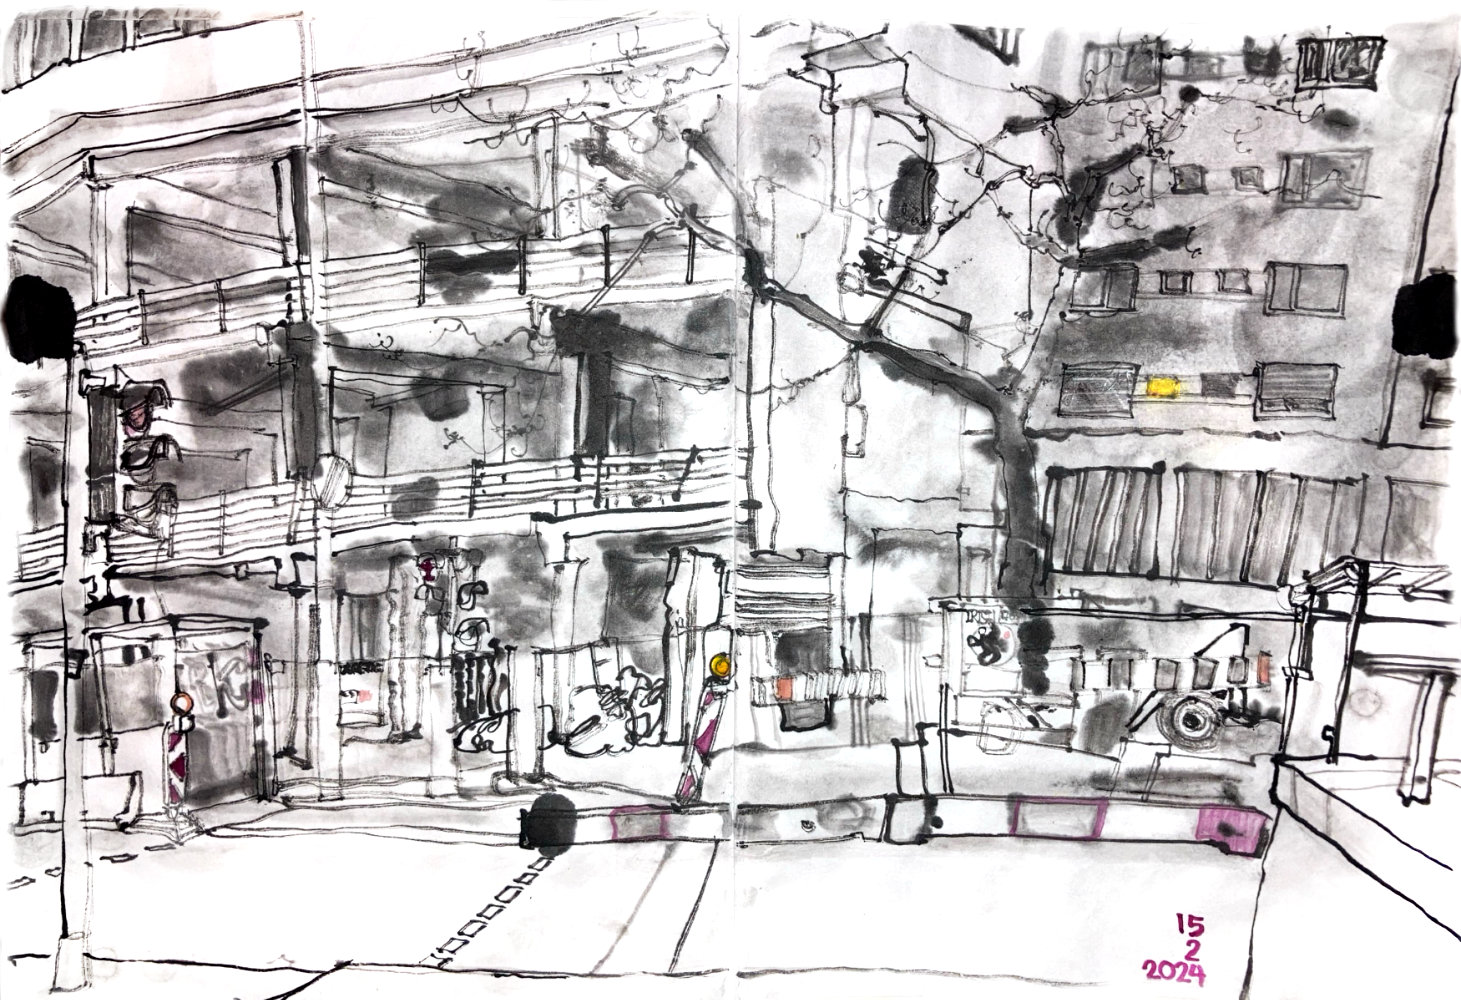 Inkdrawing of a building site